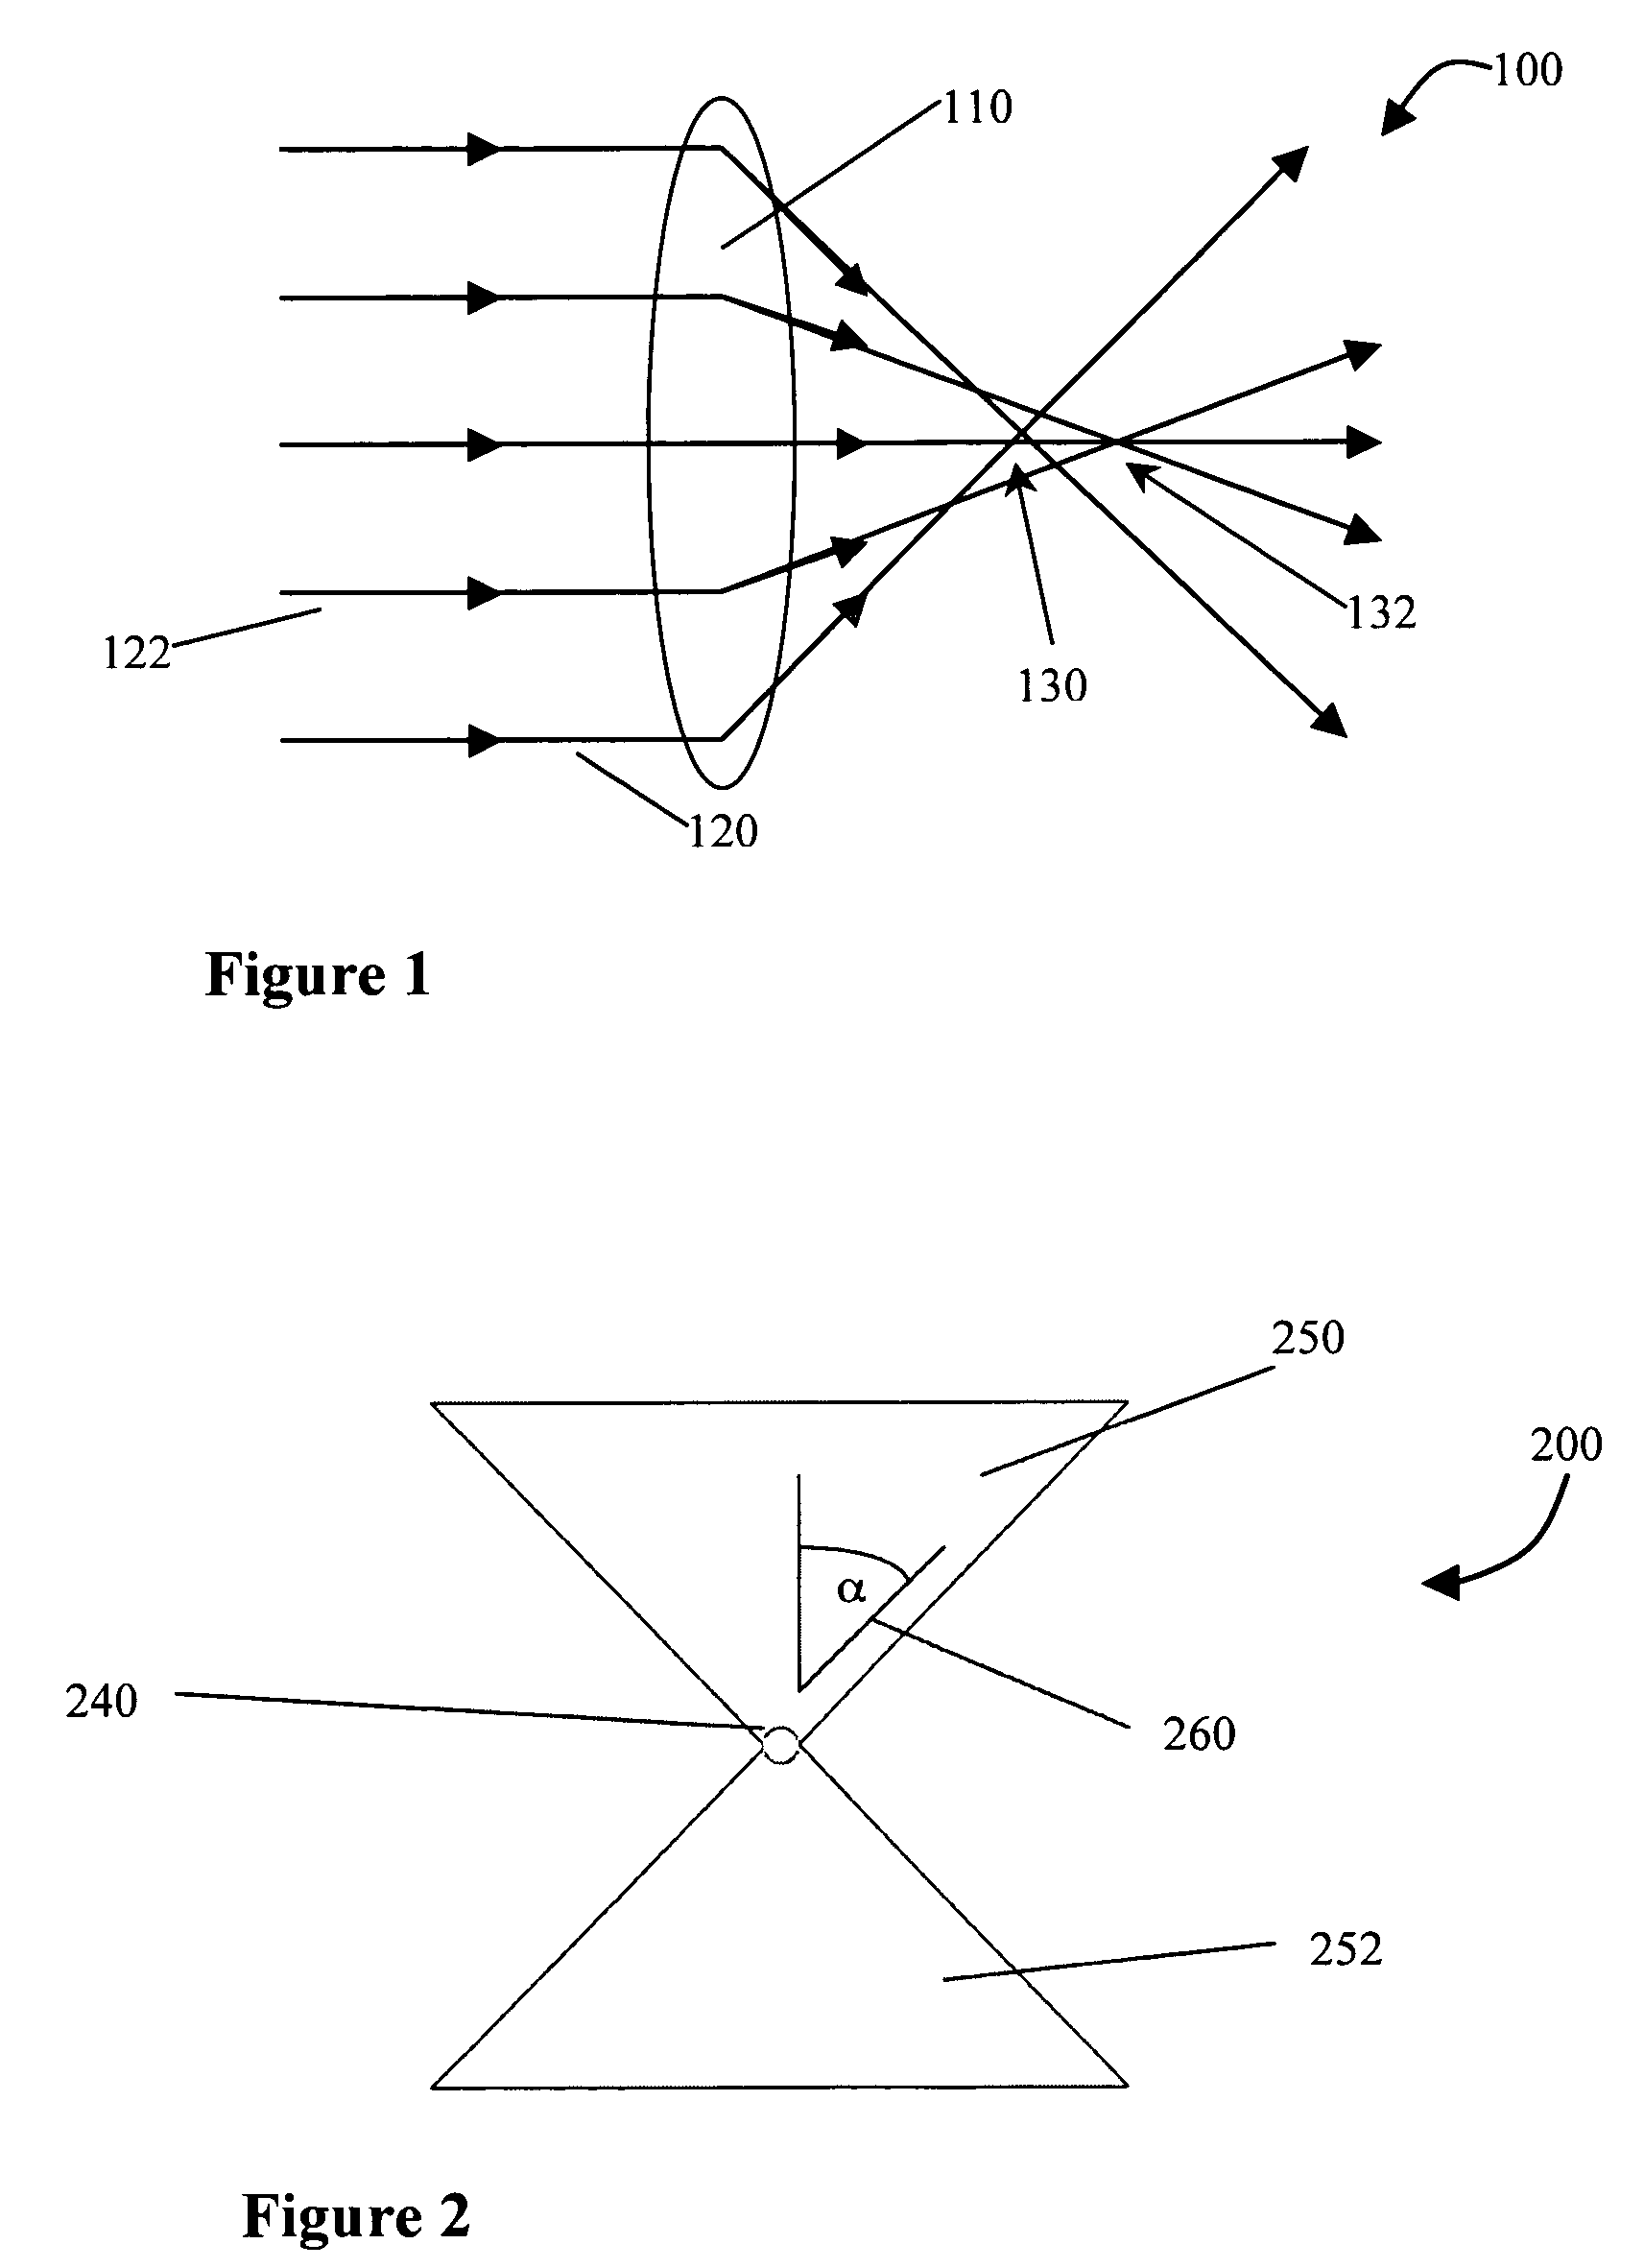 Methods, system, and program product for the detection and correction of spherical aberration